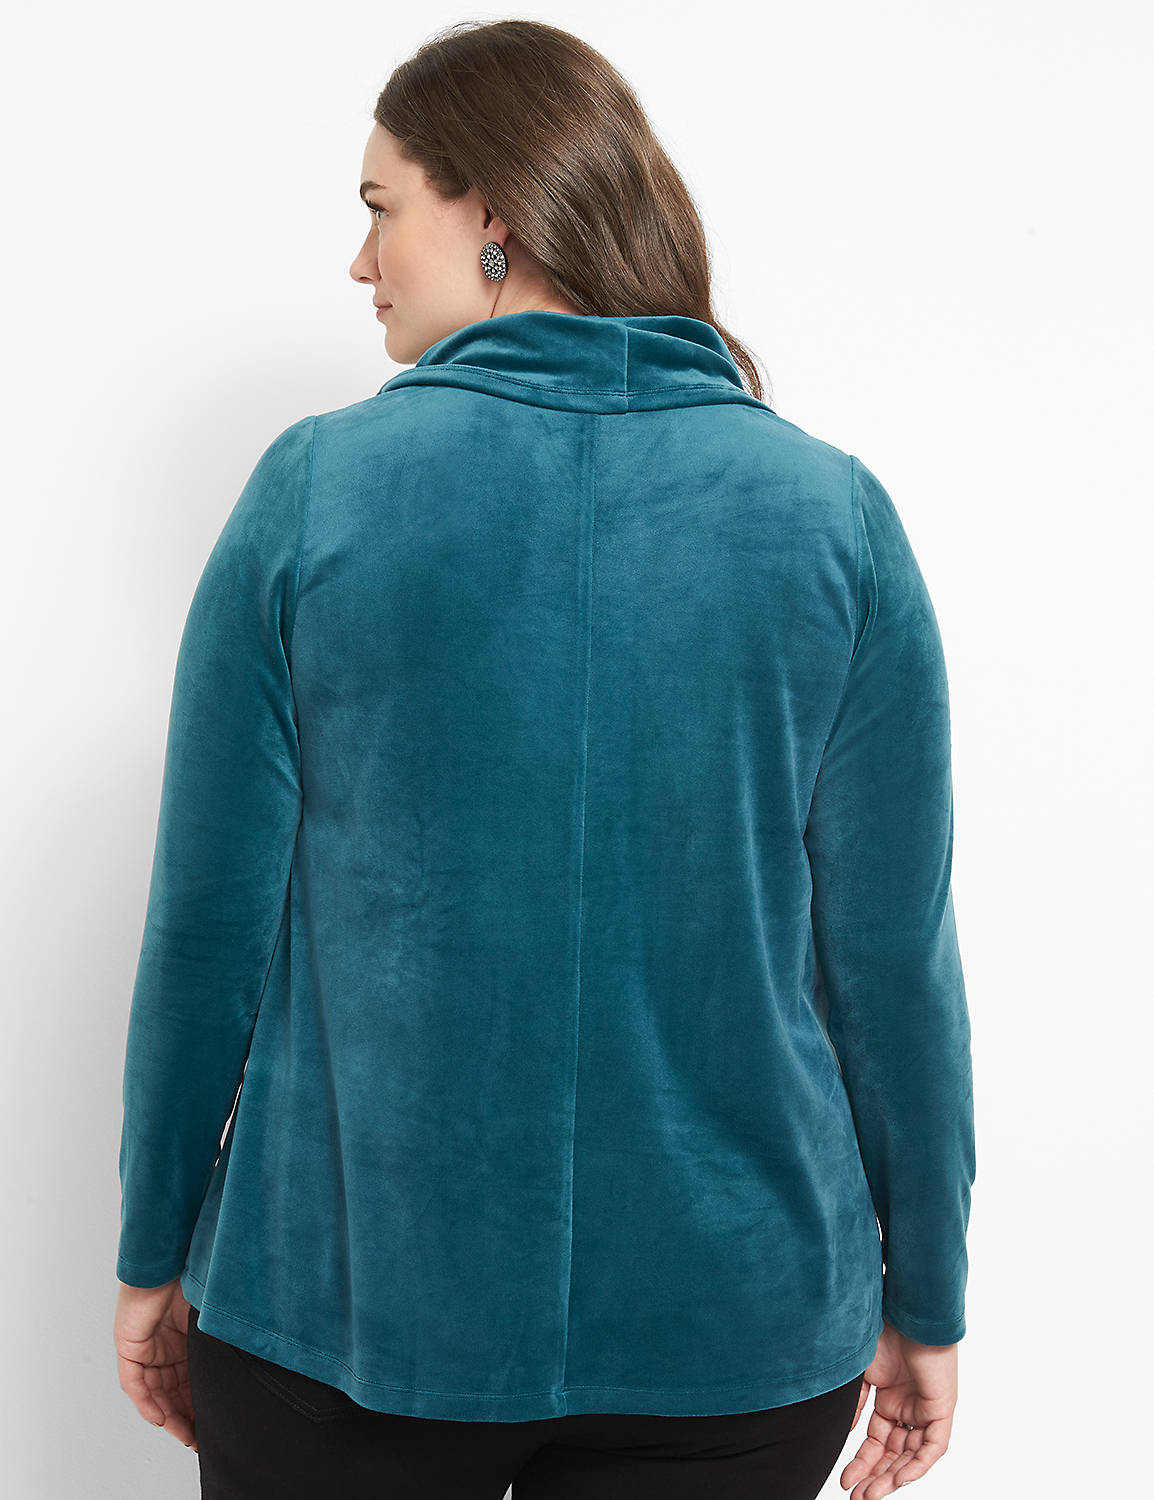 Long Sleeve Cowl Neck Moderate Swing Knit Top In Velour 1124634:PANTONE Deep Teal:10/12 Product Image 2